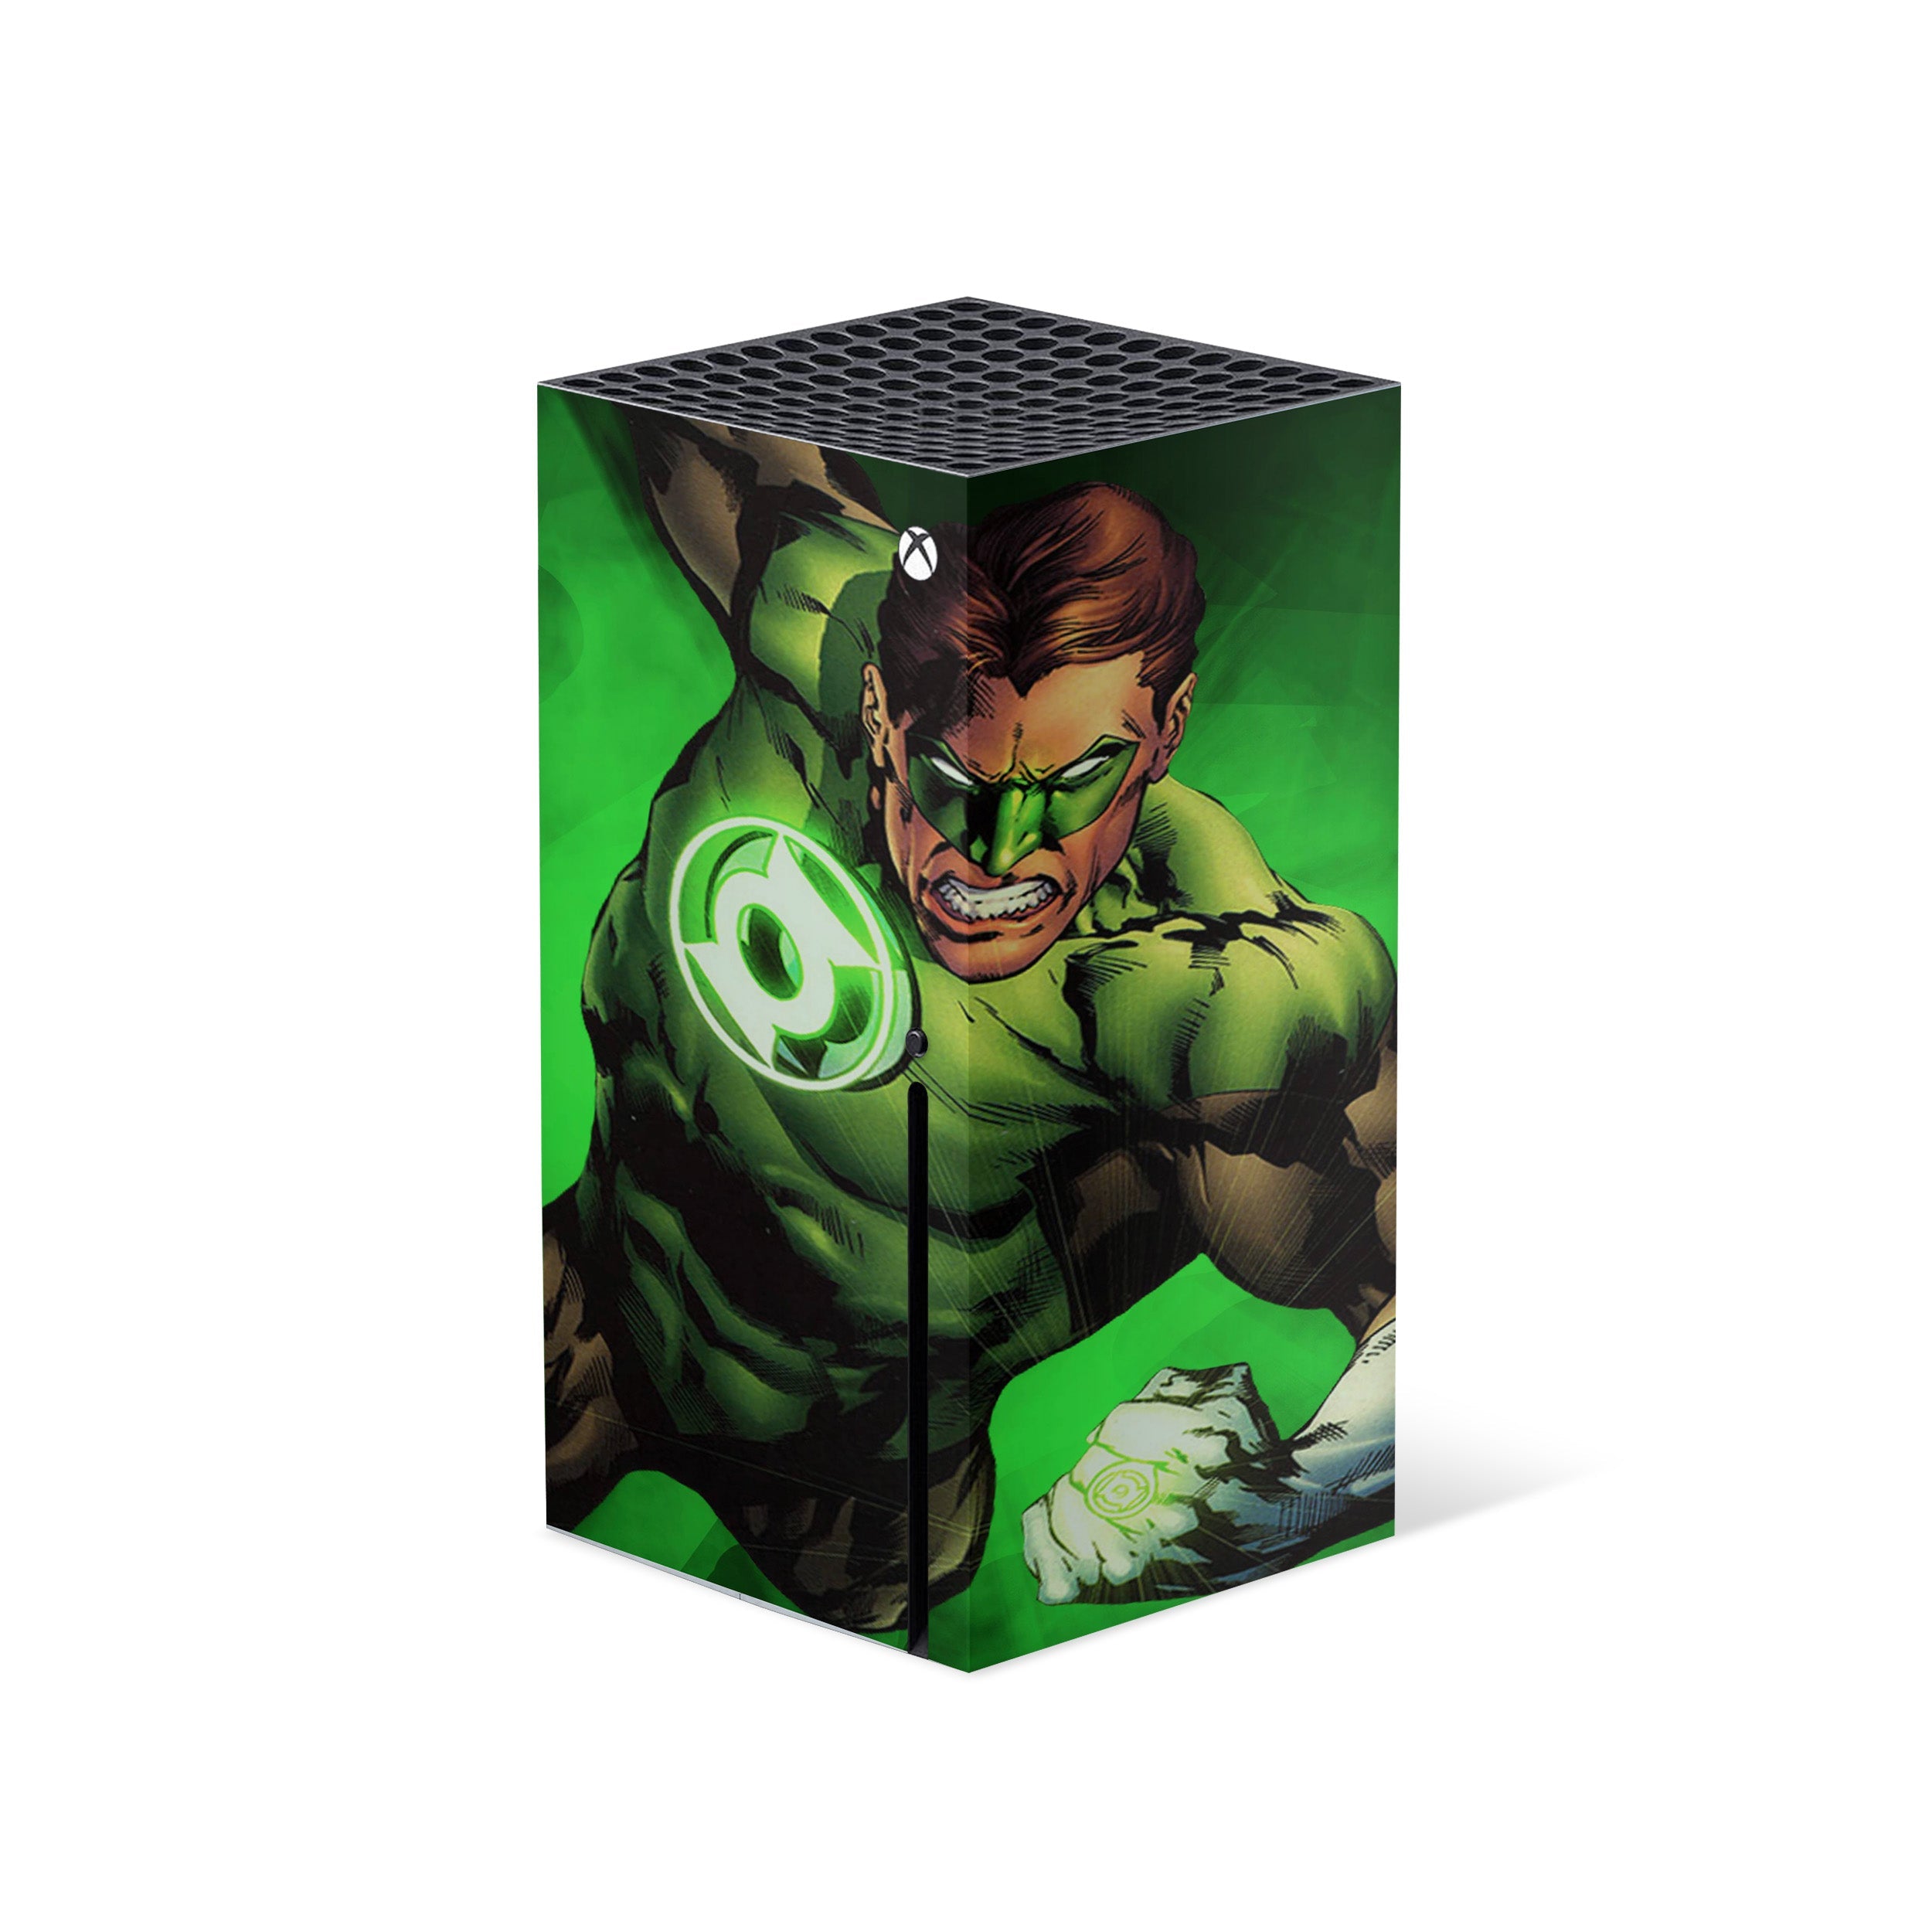 A video game skin featuring a Marvel Green Lantern design for the Xbox Series X.